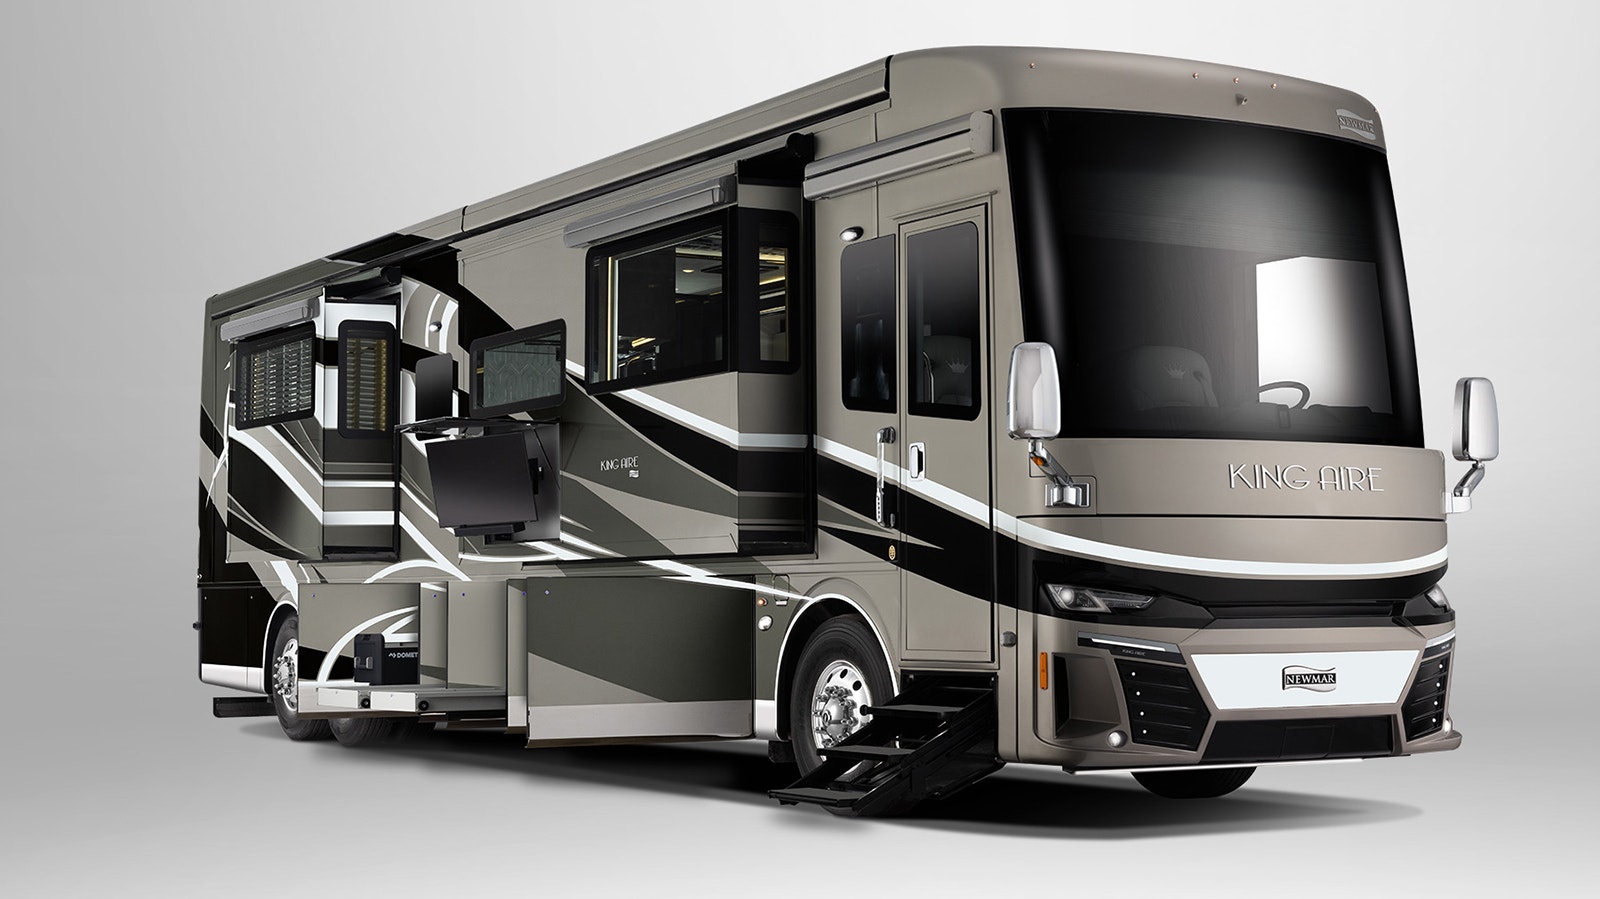 The newest Newmar King Aire motor home starts at $1.6 million, but can be much more expensive with add-ons. In this photo, its poppets and outside amenities are exposed.